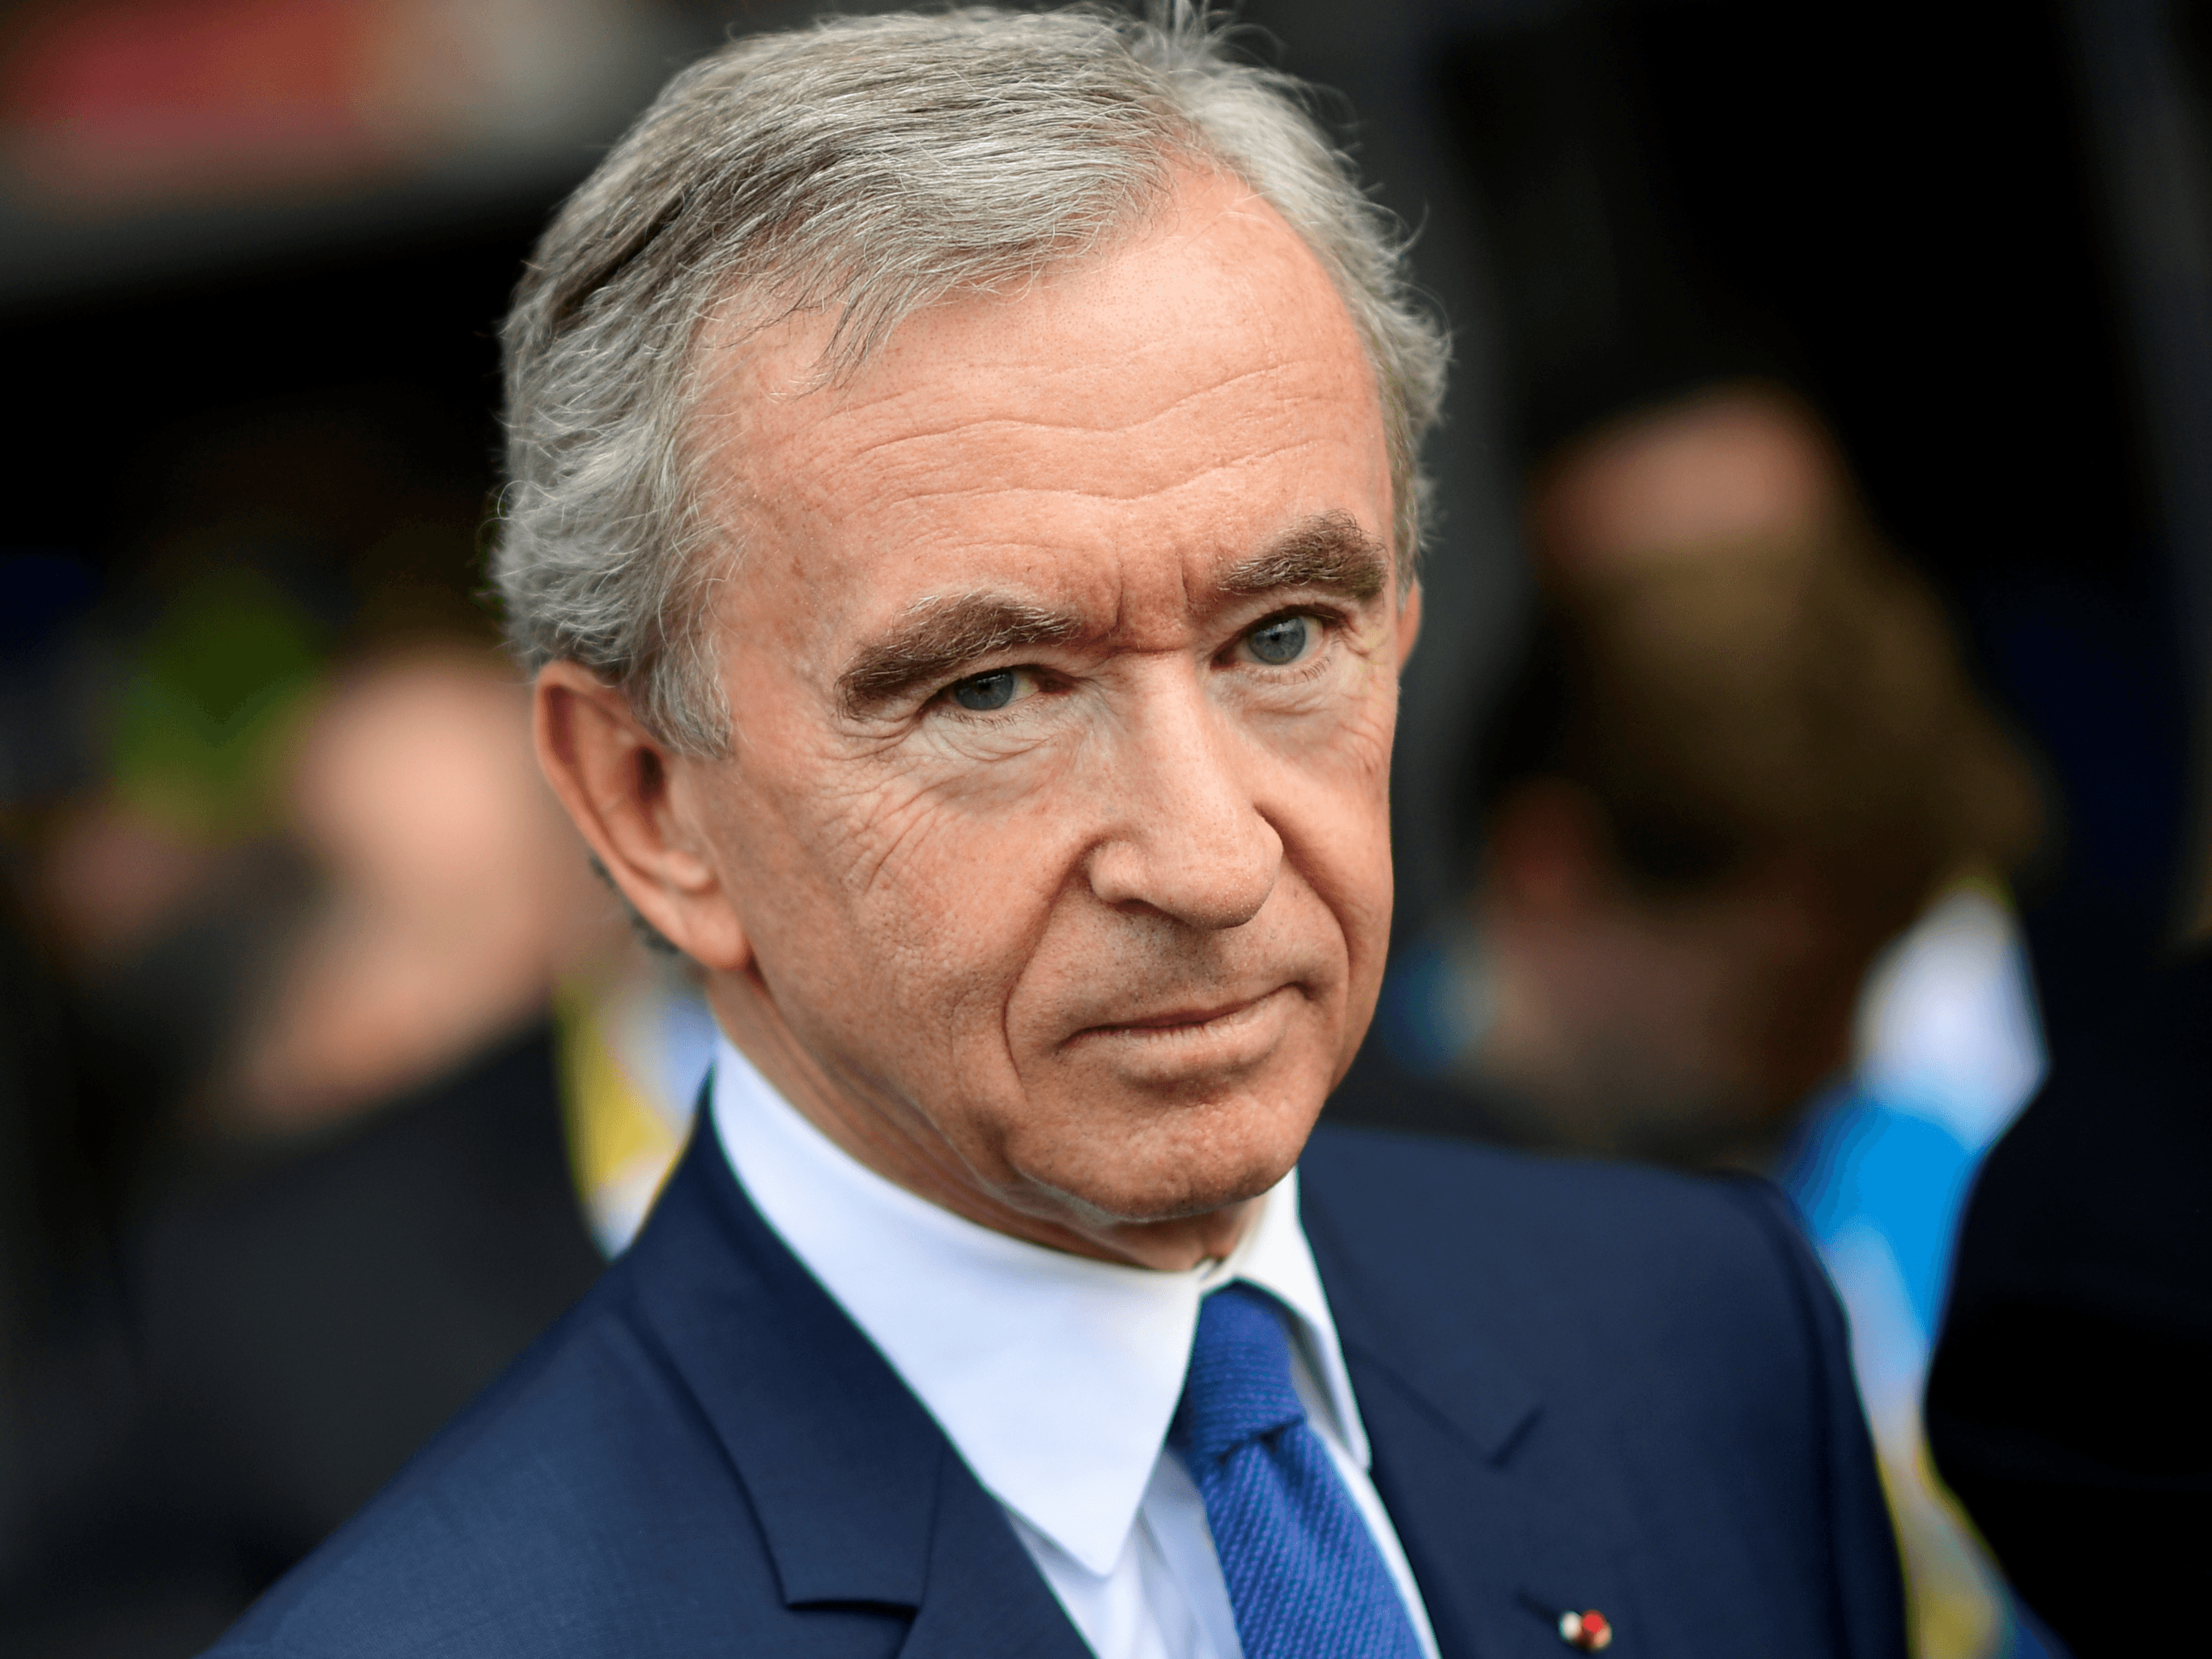 Bernard Arnault Is The Second Richest Person In The World With A